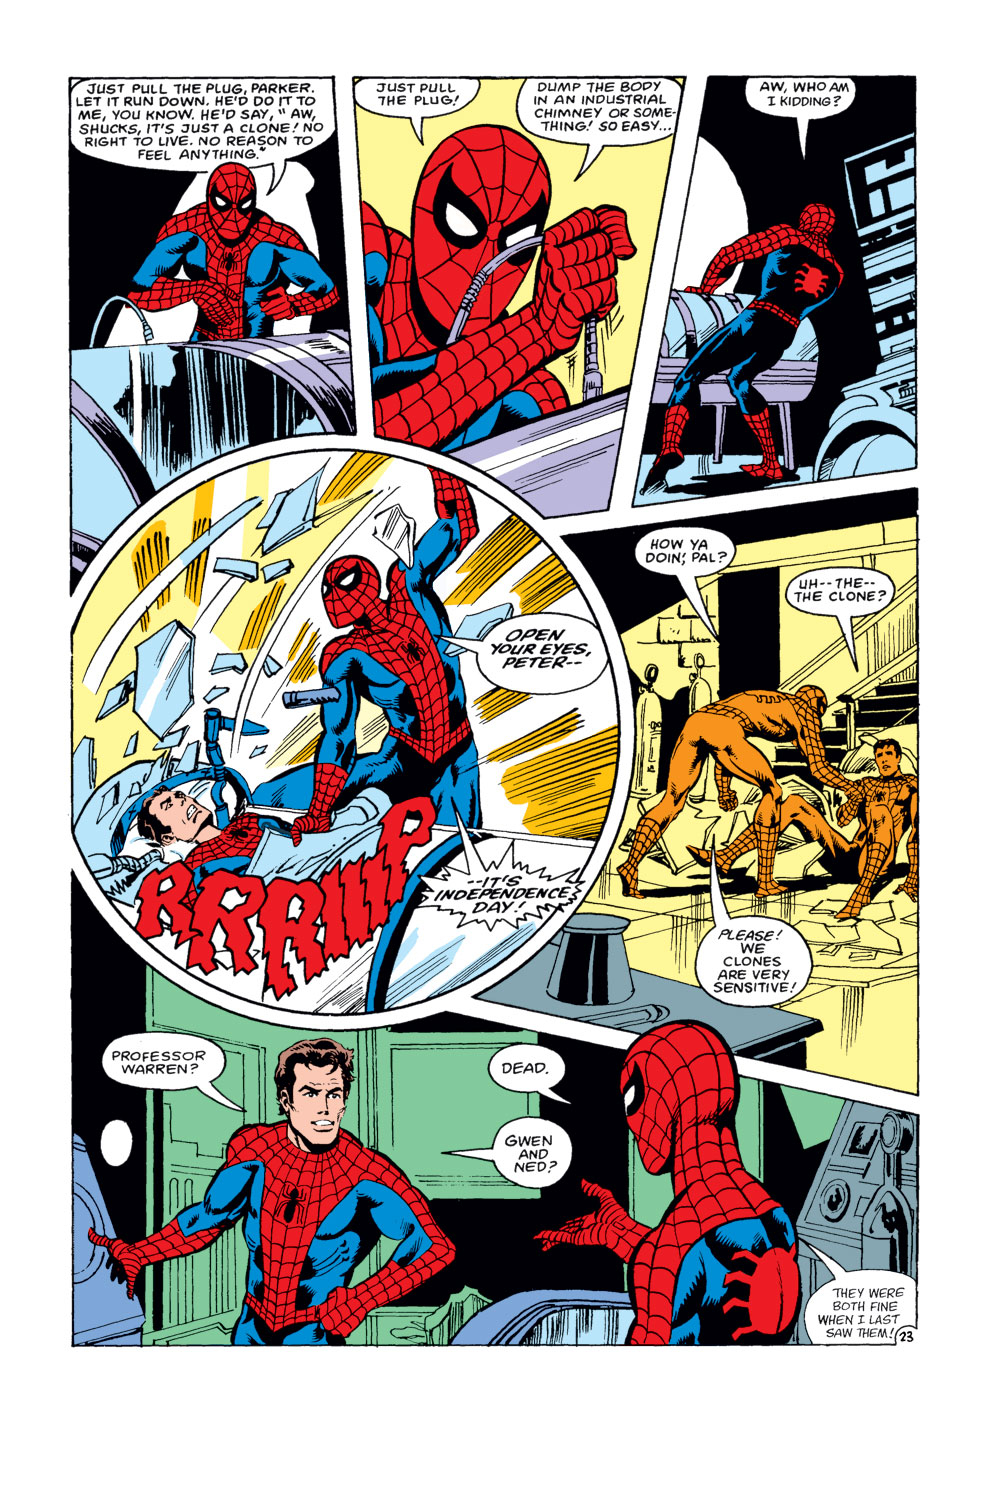 What If? (1977) issue 30 - Spider-Man's clone lived - Page 24